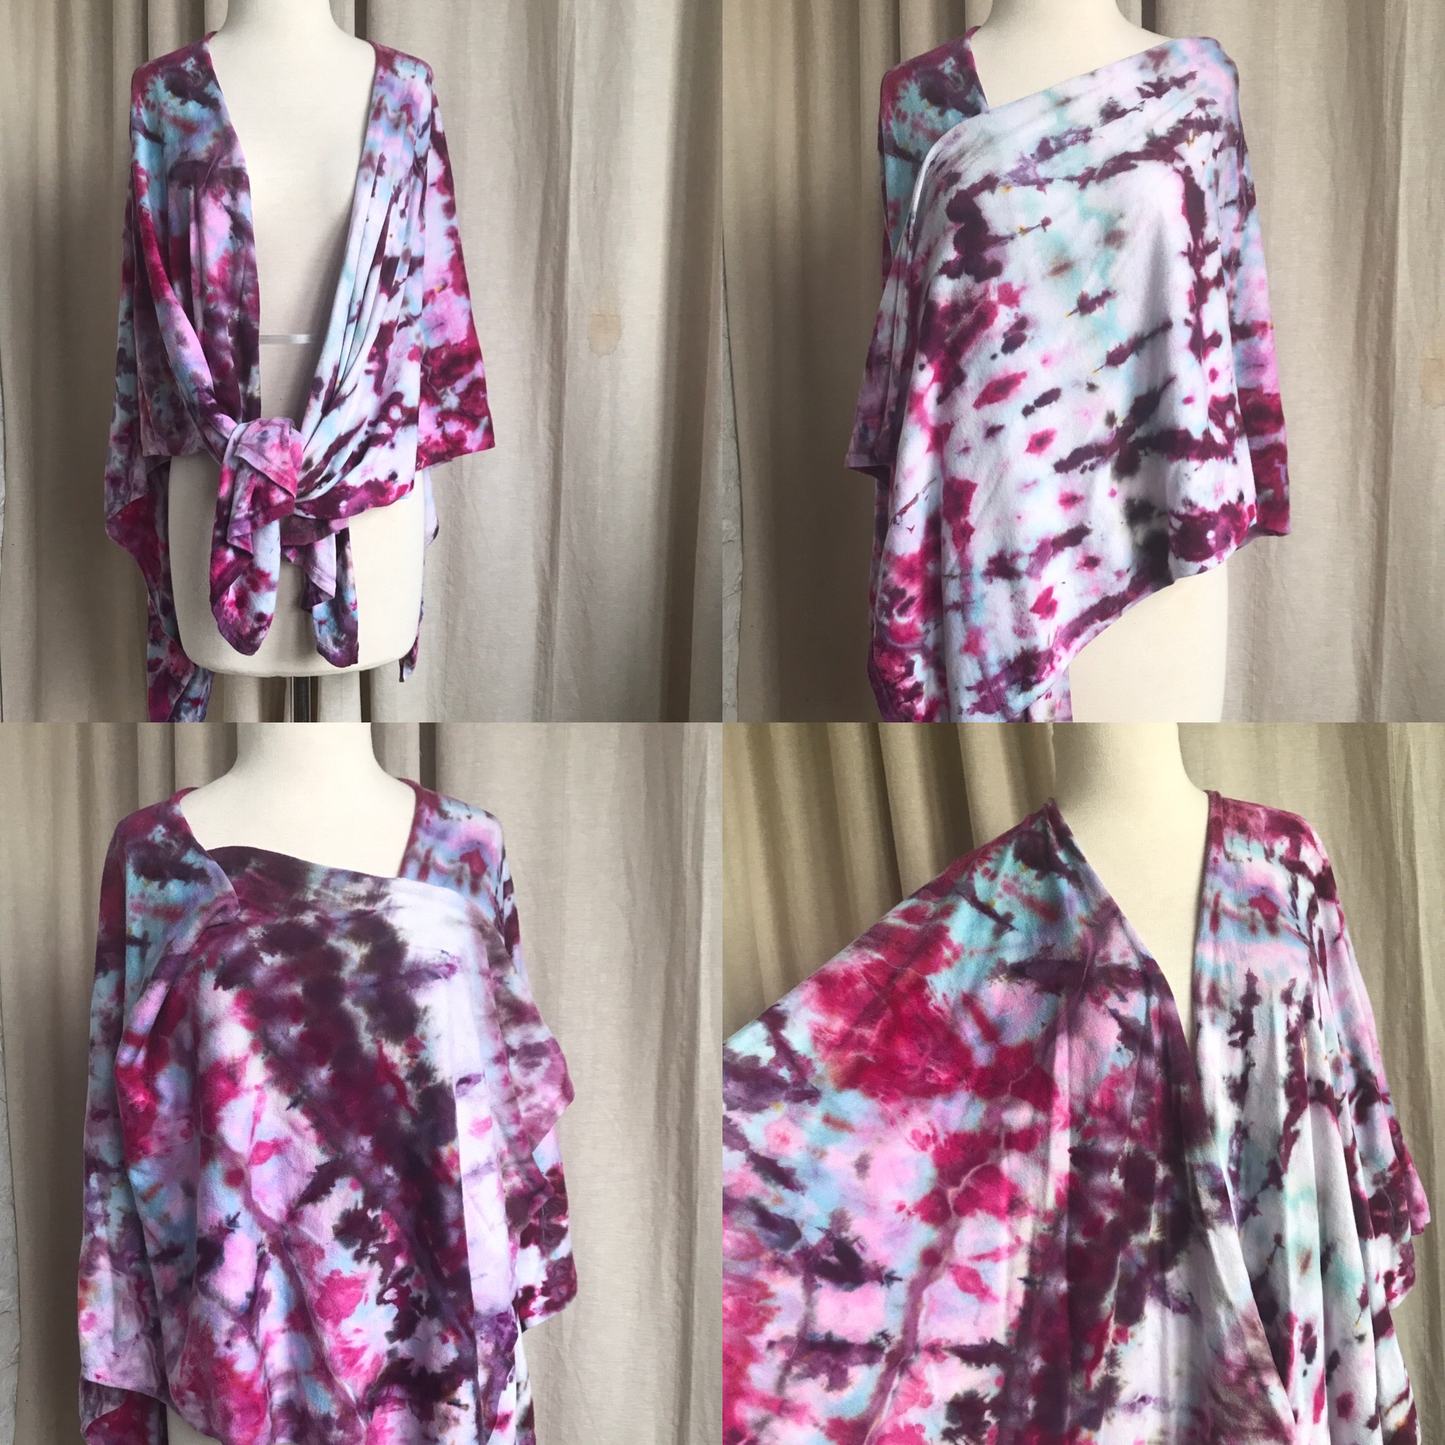 Four images of the same tie dye shawl on a dressform. the colors of the shawl are turquoise, fuschia and plum in abstract and irregular lines